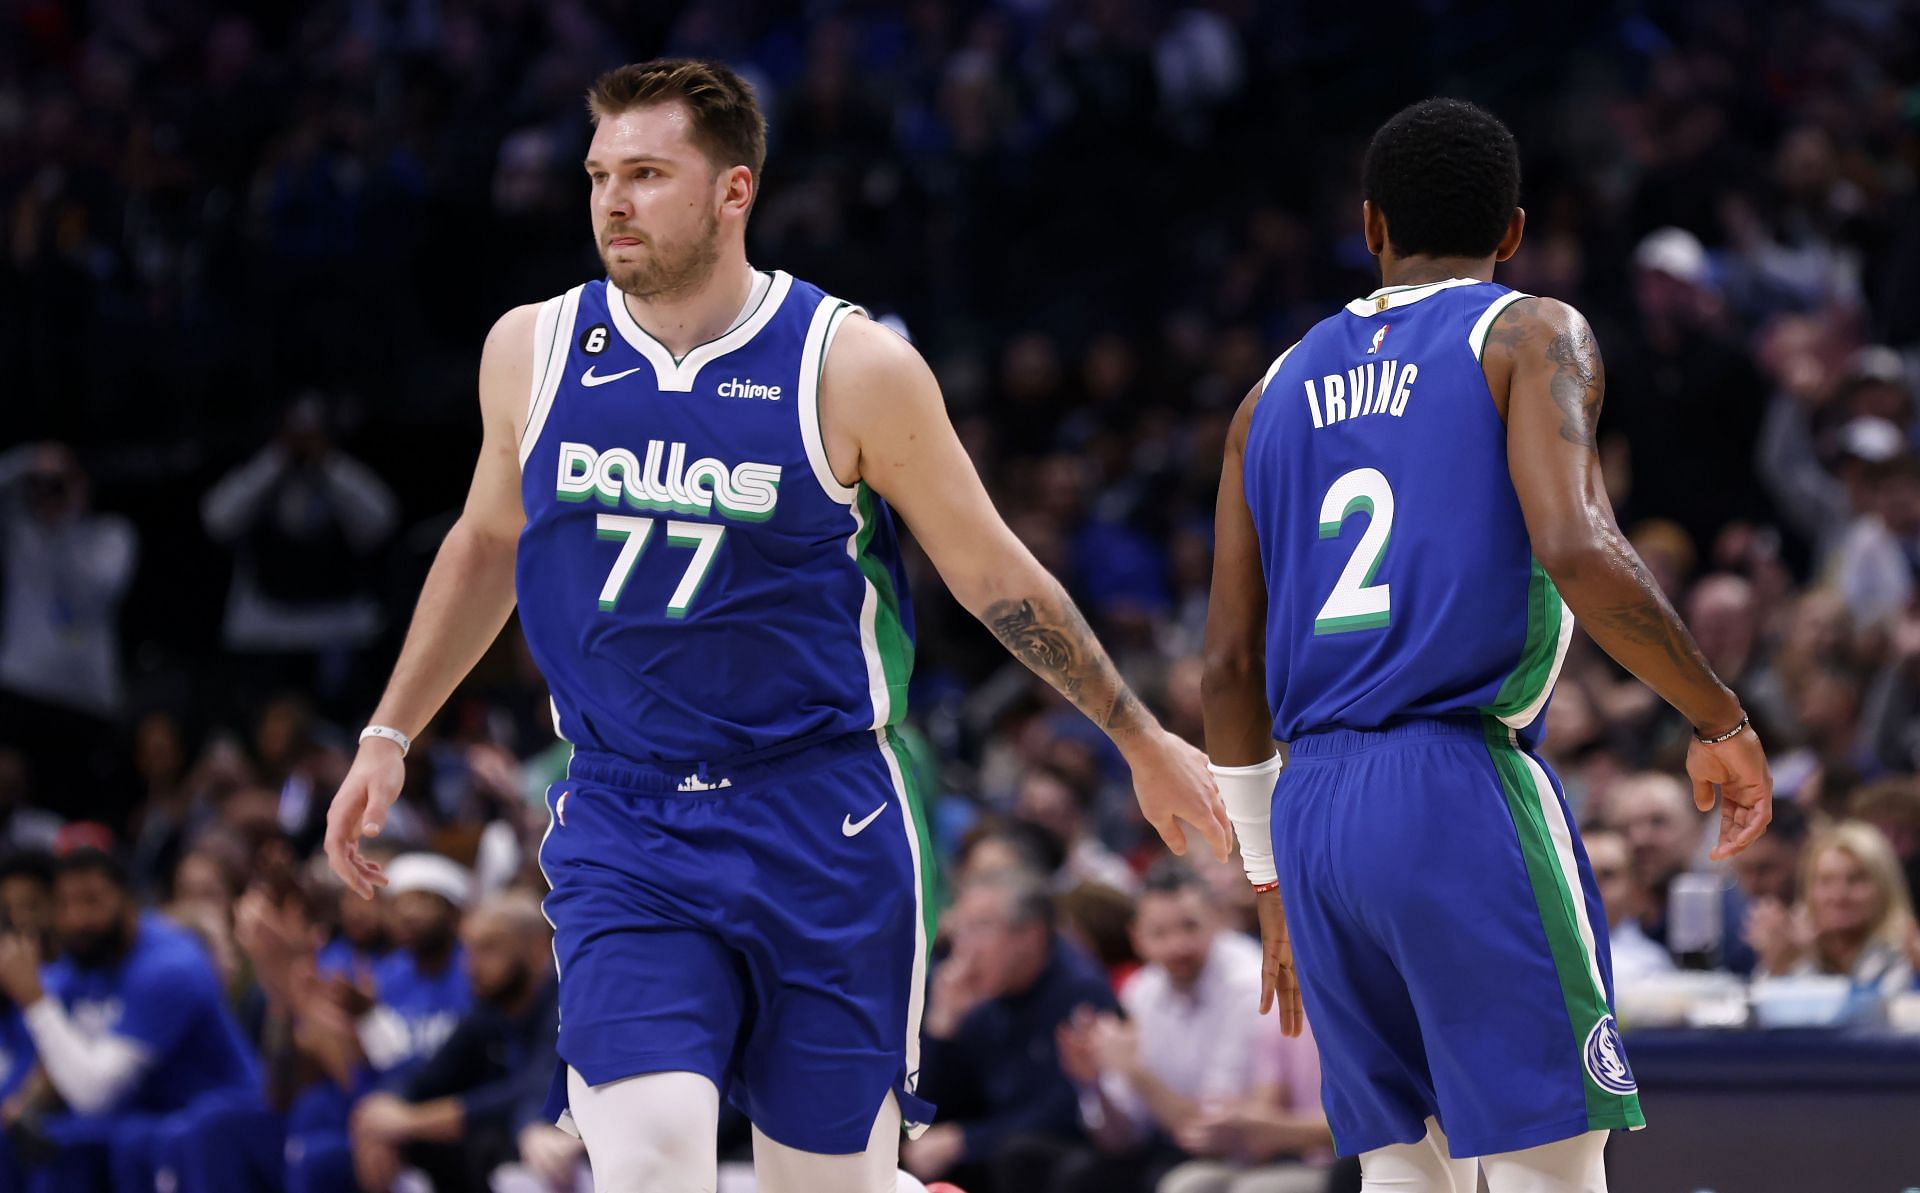 Luka Doncic: When there's still a chance, I'm going to play